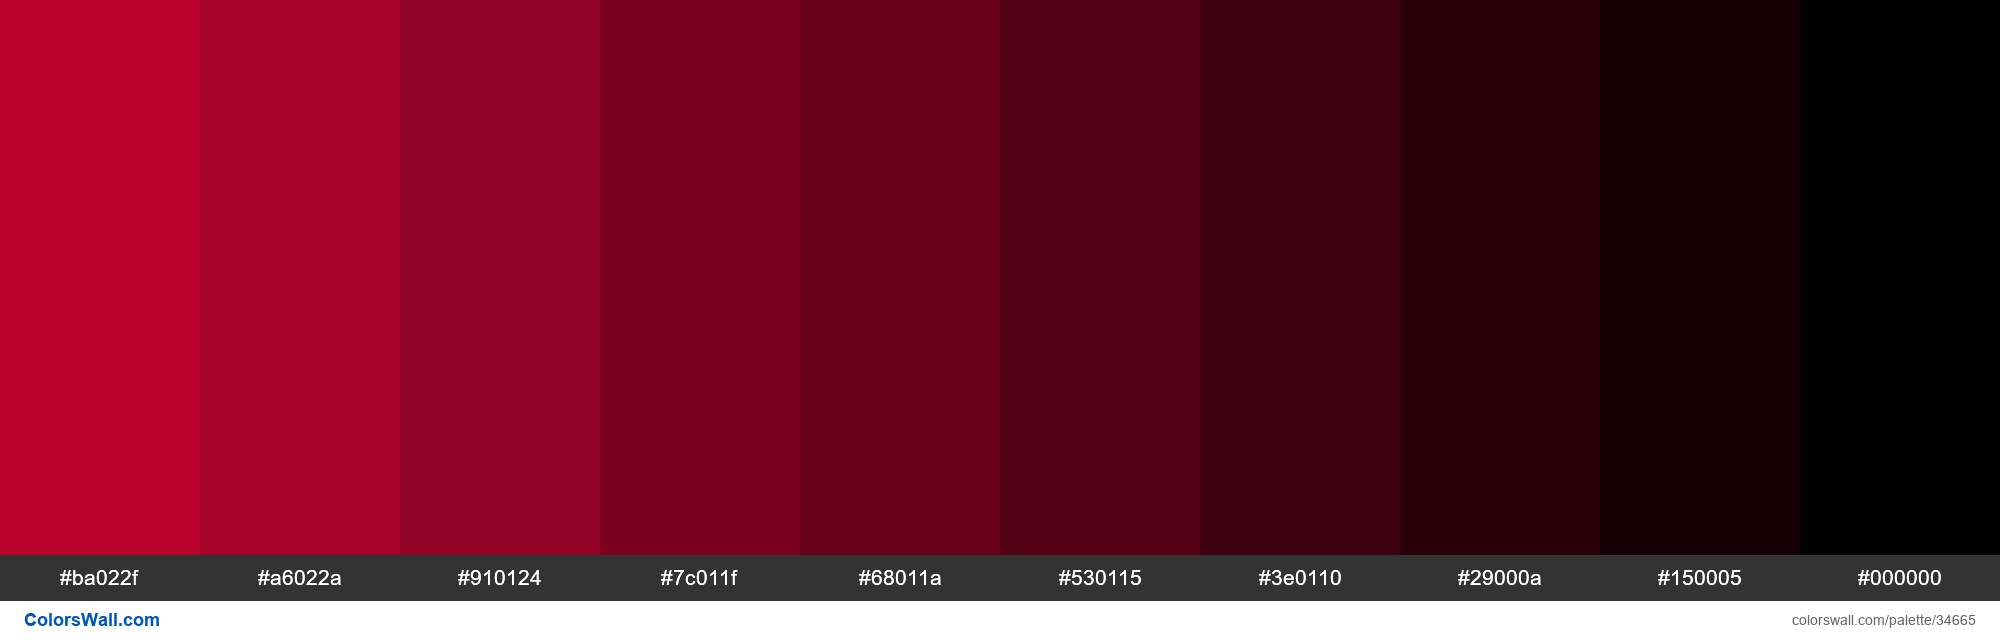 Shades XKCD Color cherry #cf0234 hex colors palette - ColorsWall